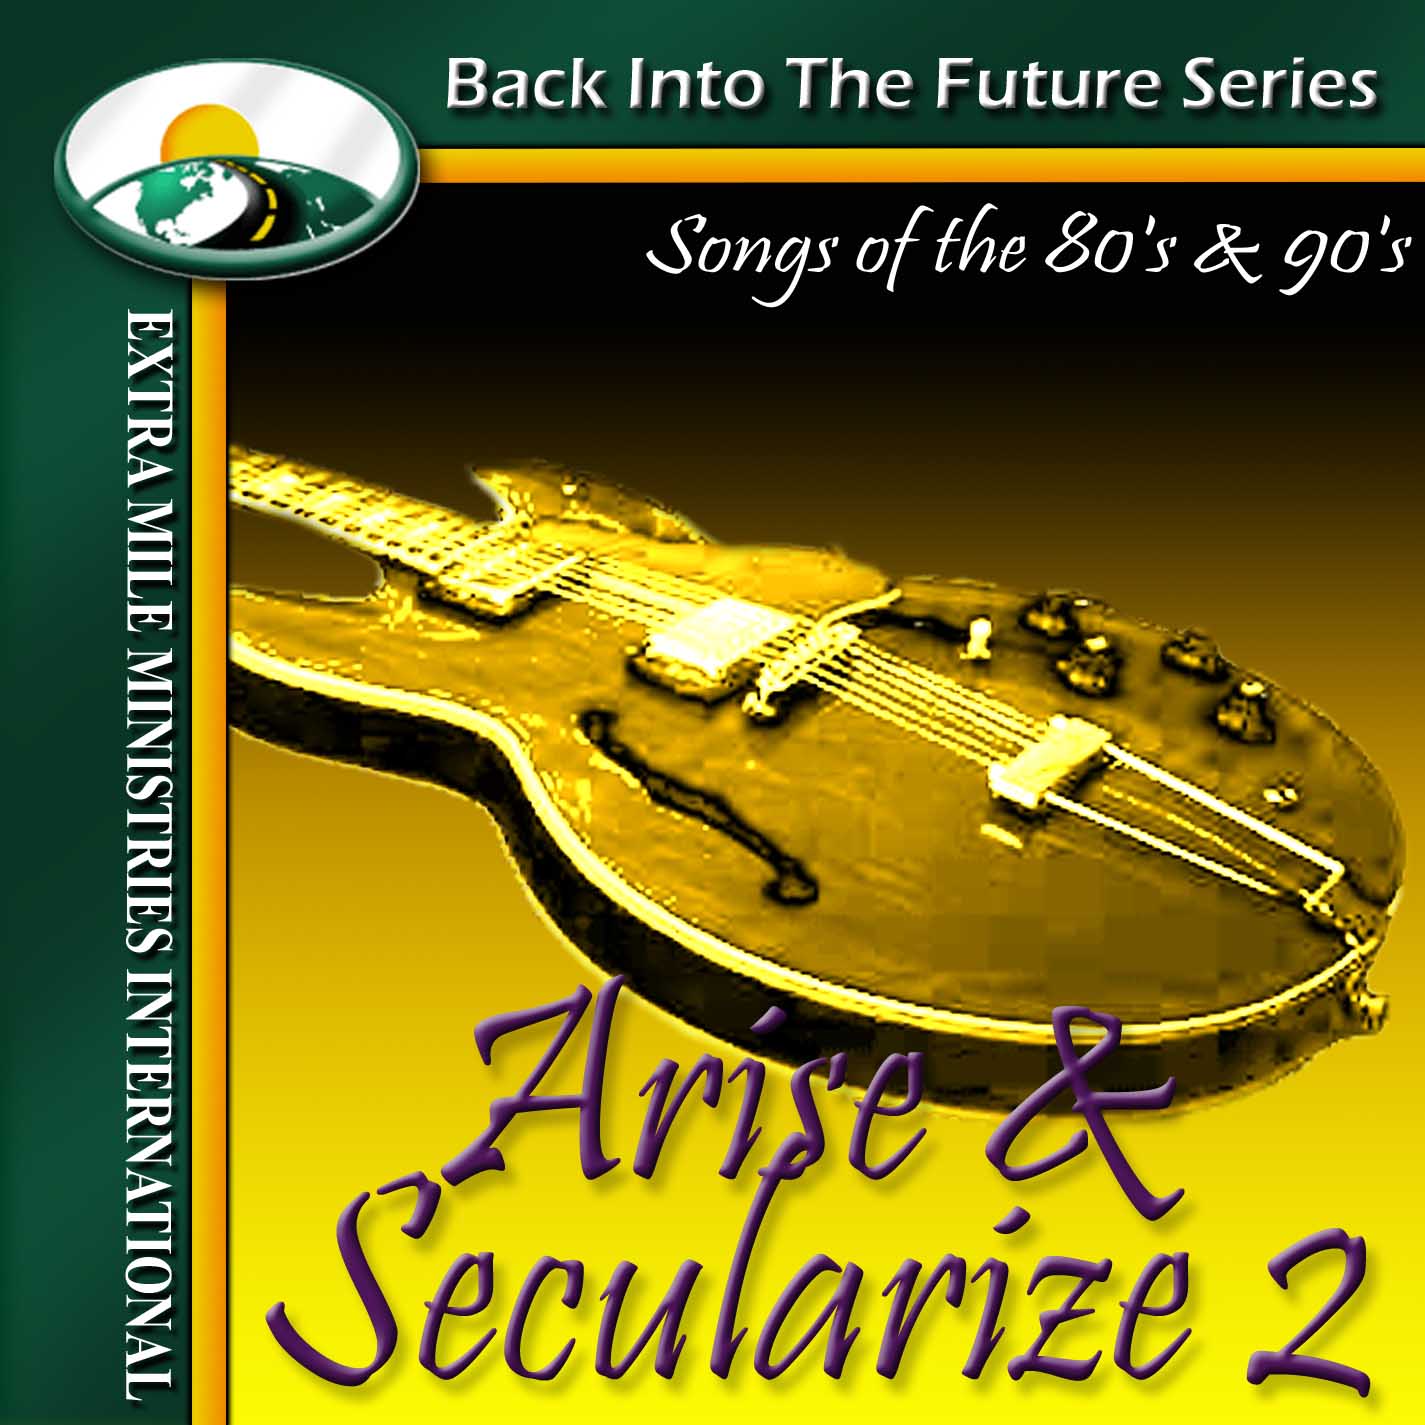 Arise and Secularize